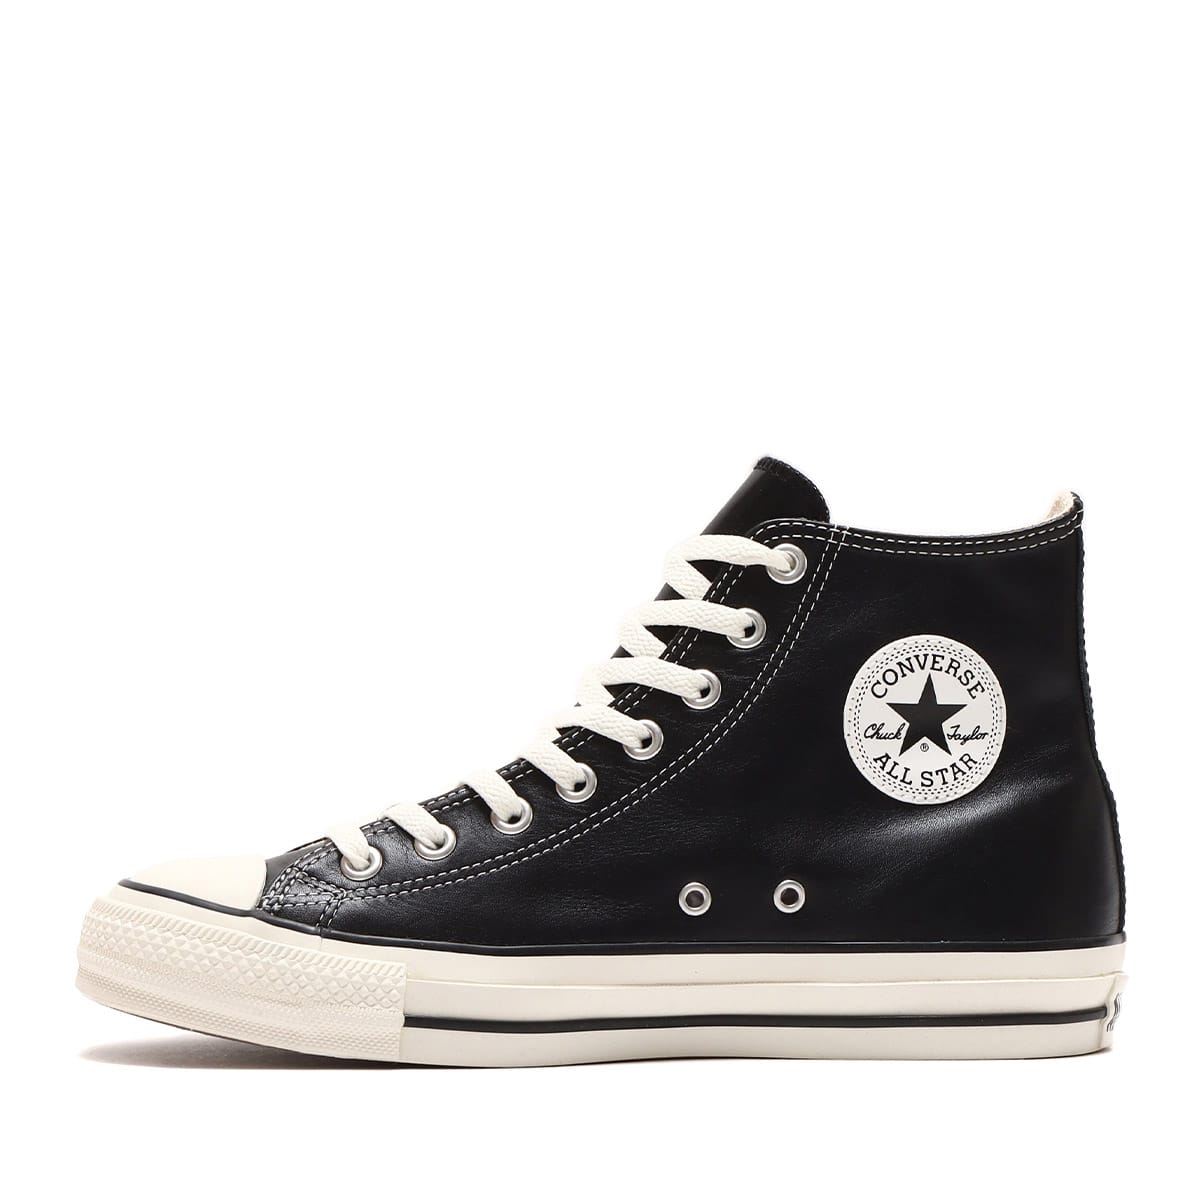 CONVERSE AS (R) OLIVE GREEN LEATHER HI BLACK